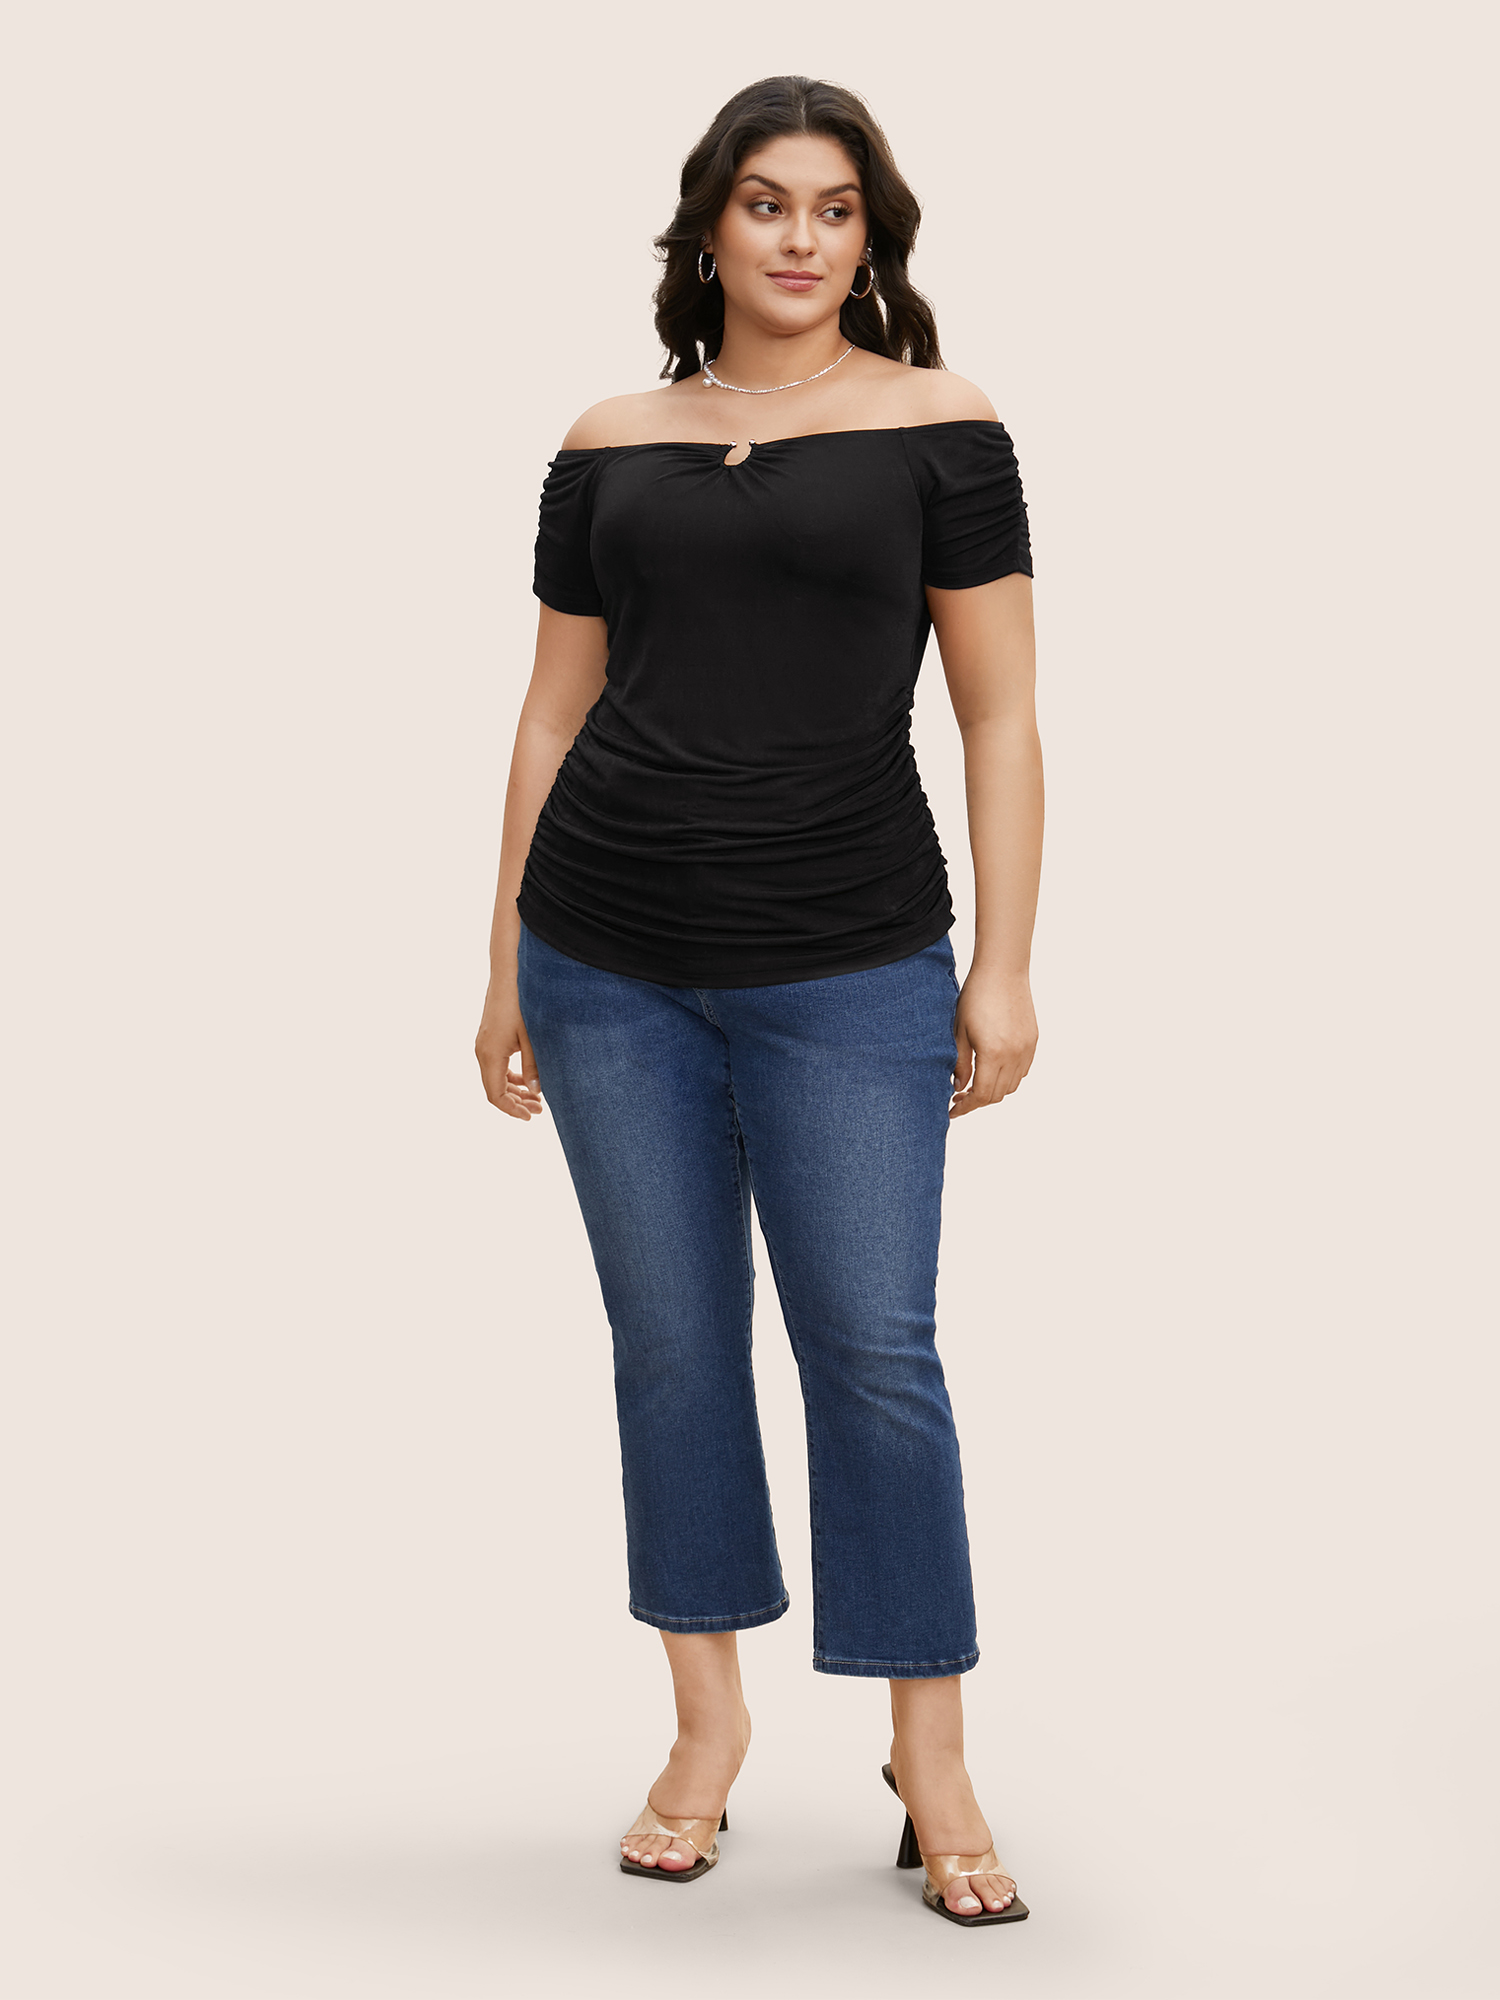 

Plus Size One Shoulder Neck Cut Out Gathered T-shirt Black Women Elegant Cut-Out One-shoulder neck Bodycon Everyday T-shirts BloomChic